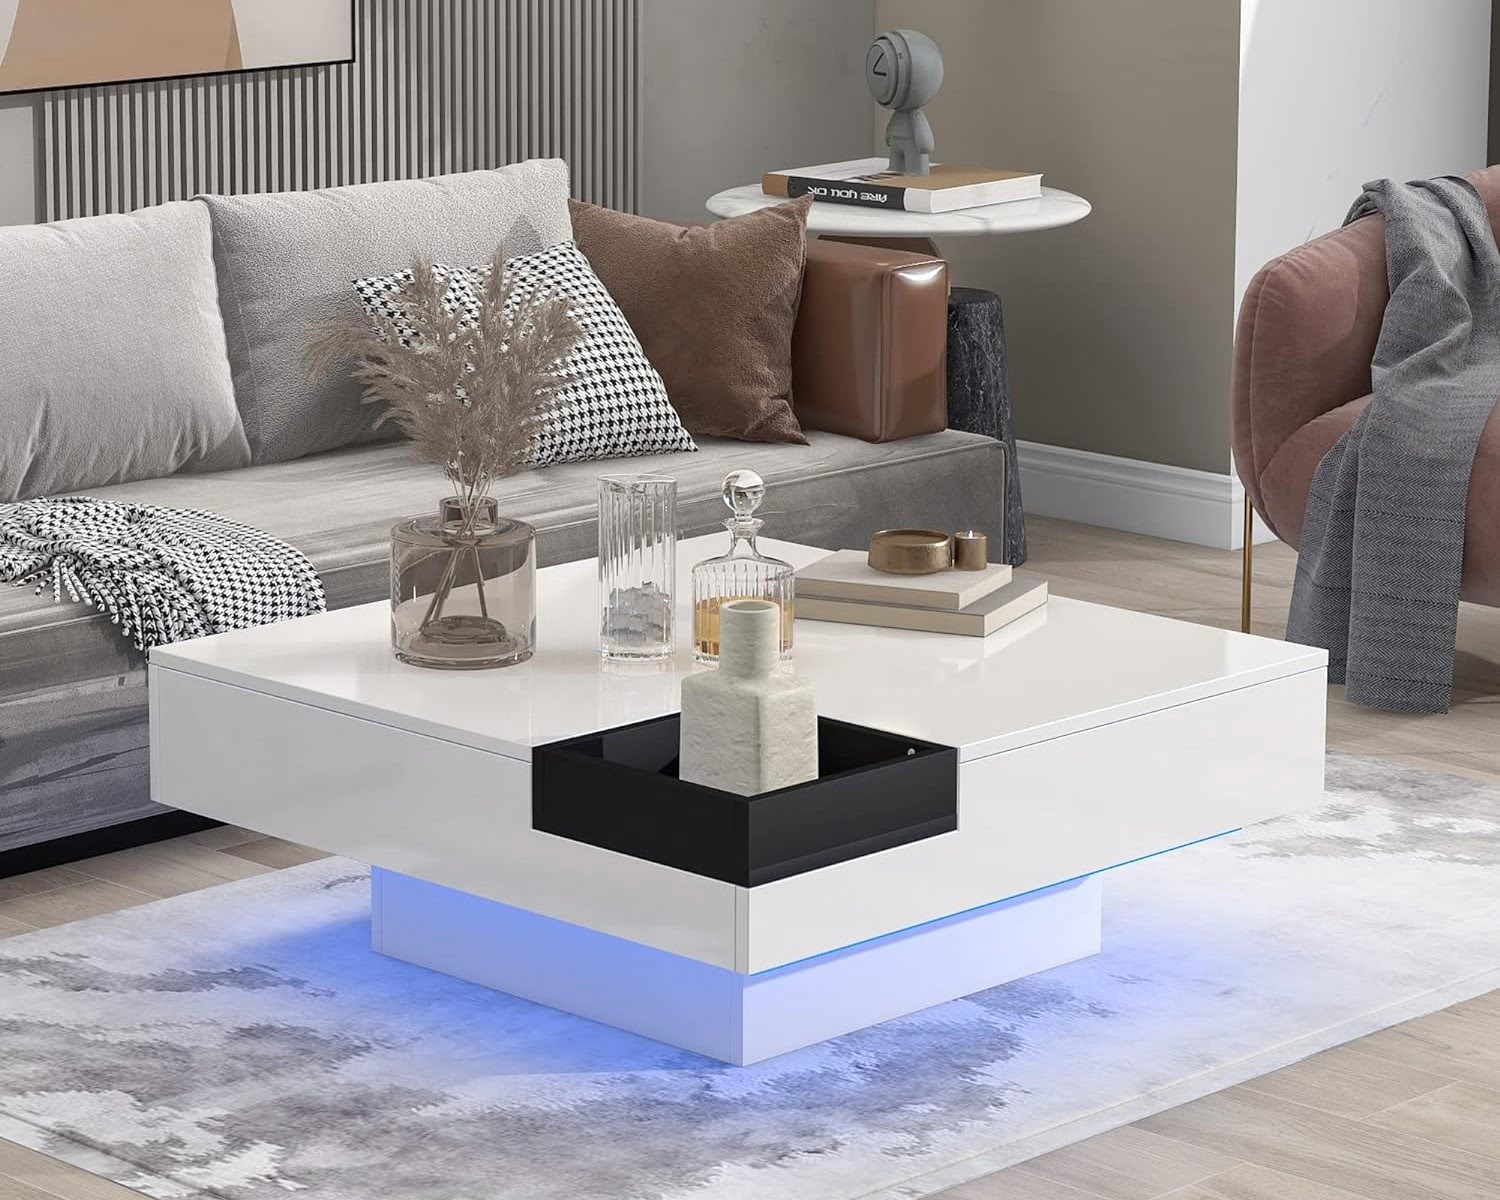 How To Style A Square Coffee Table